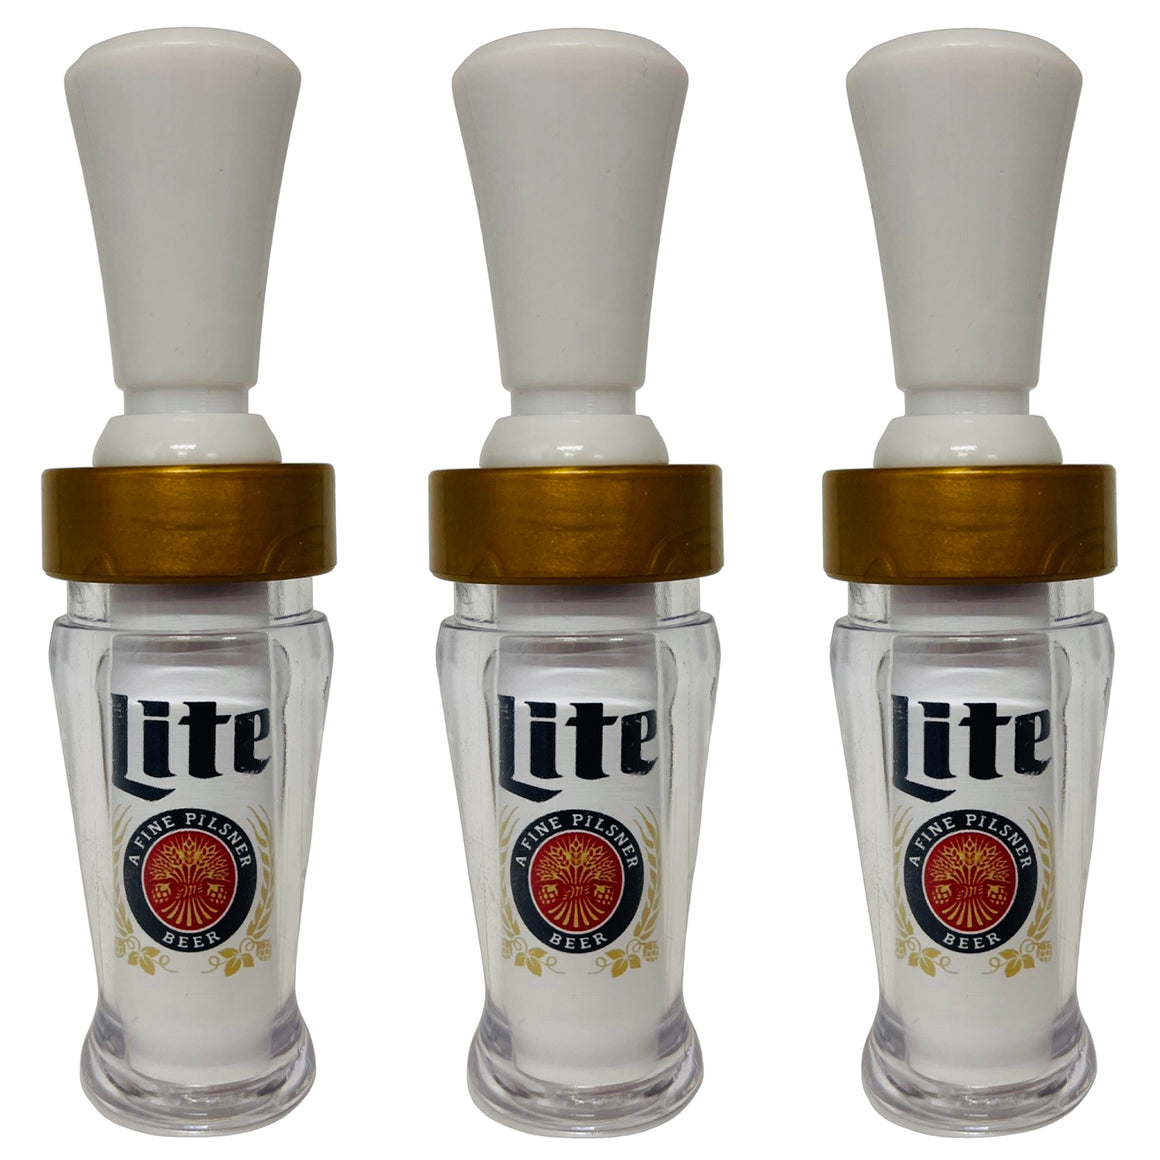 POLYCARBONATE IMAGE DUCK CALL MILLER LITE